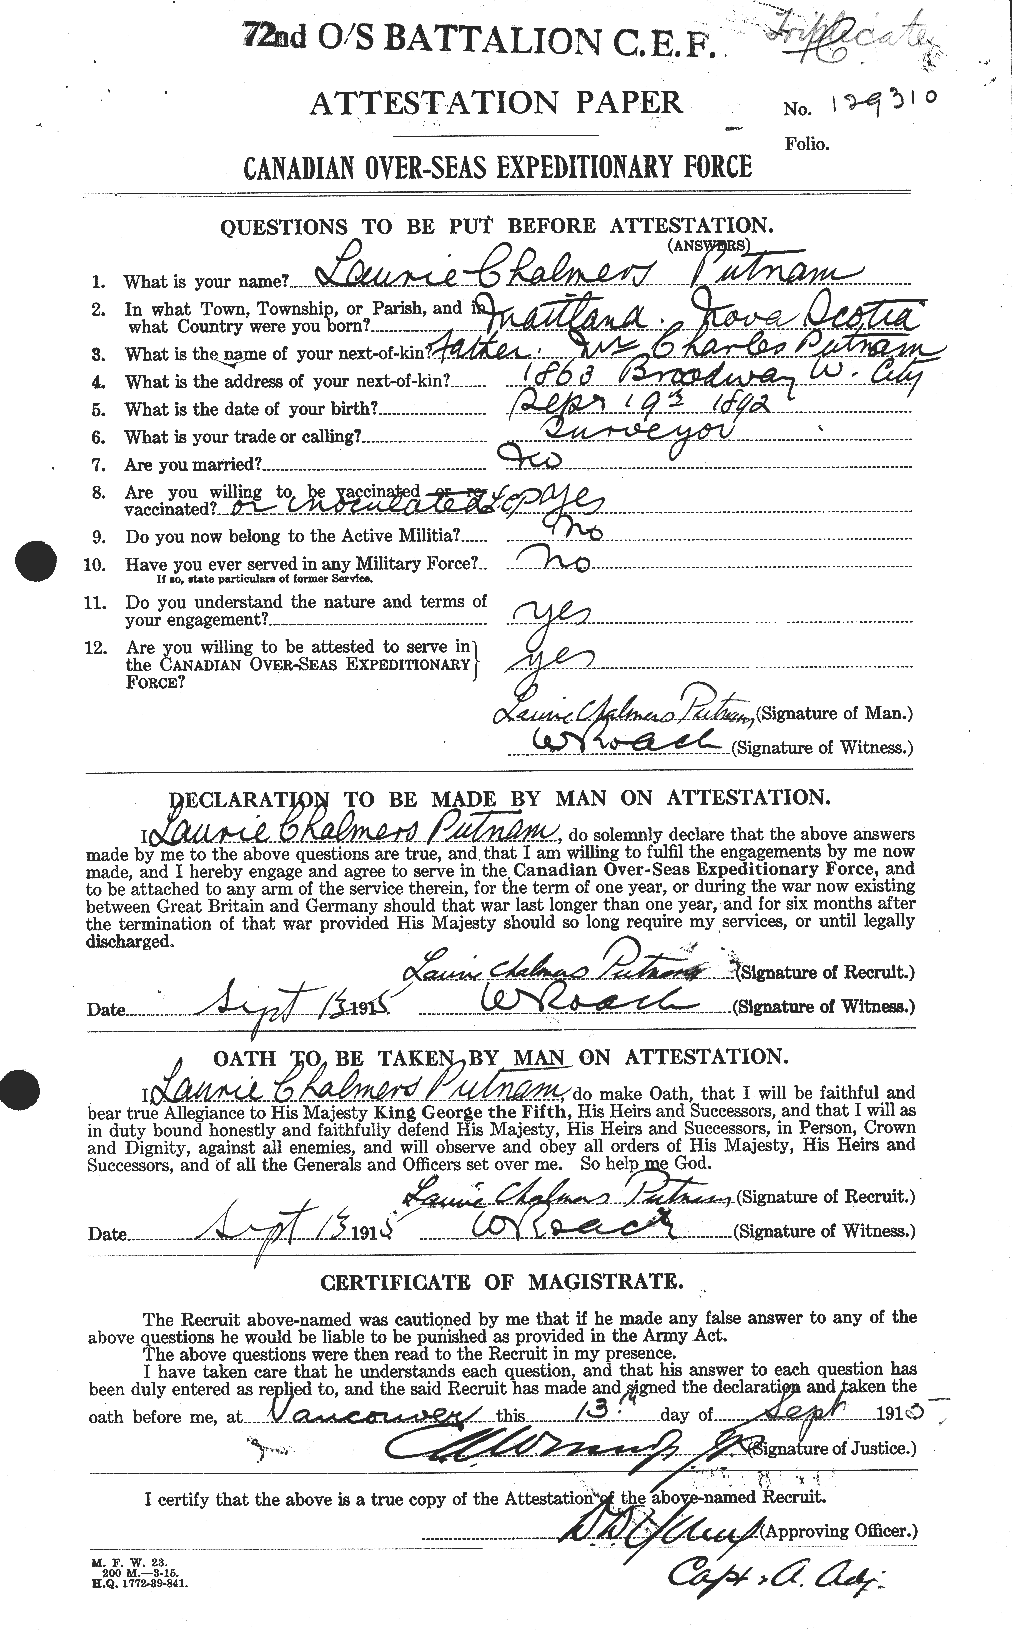 Personnel Records of the First World War - CEF 591732a